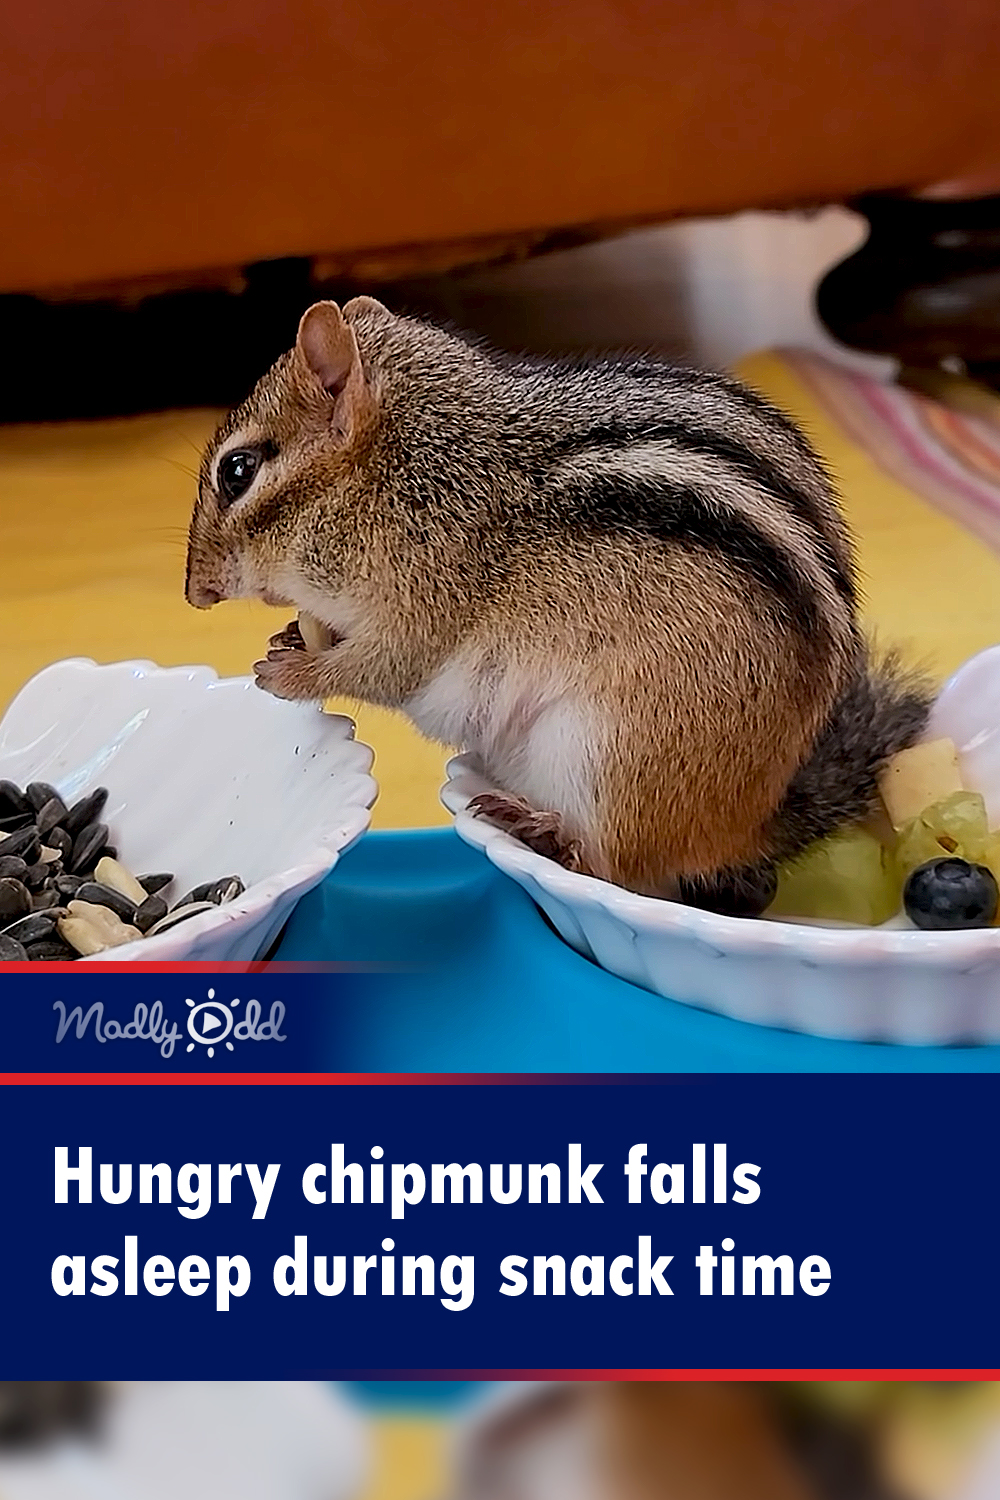 Hungry chipmunk falls asleep during snack time